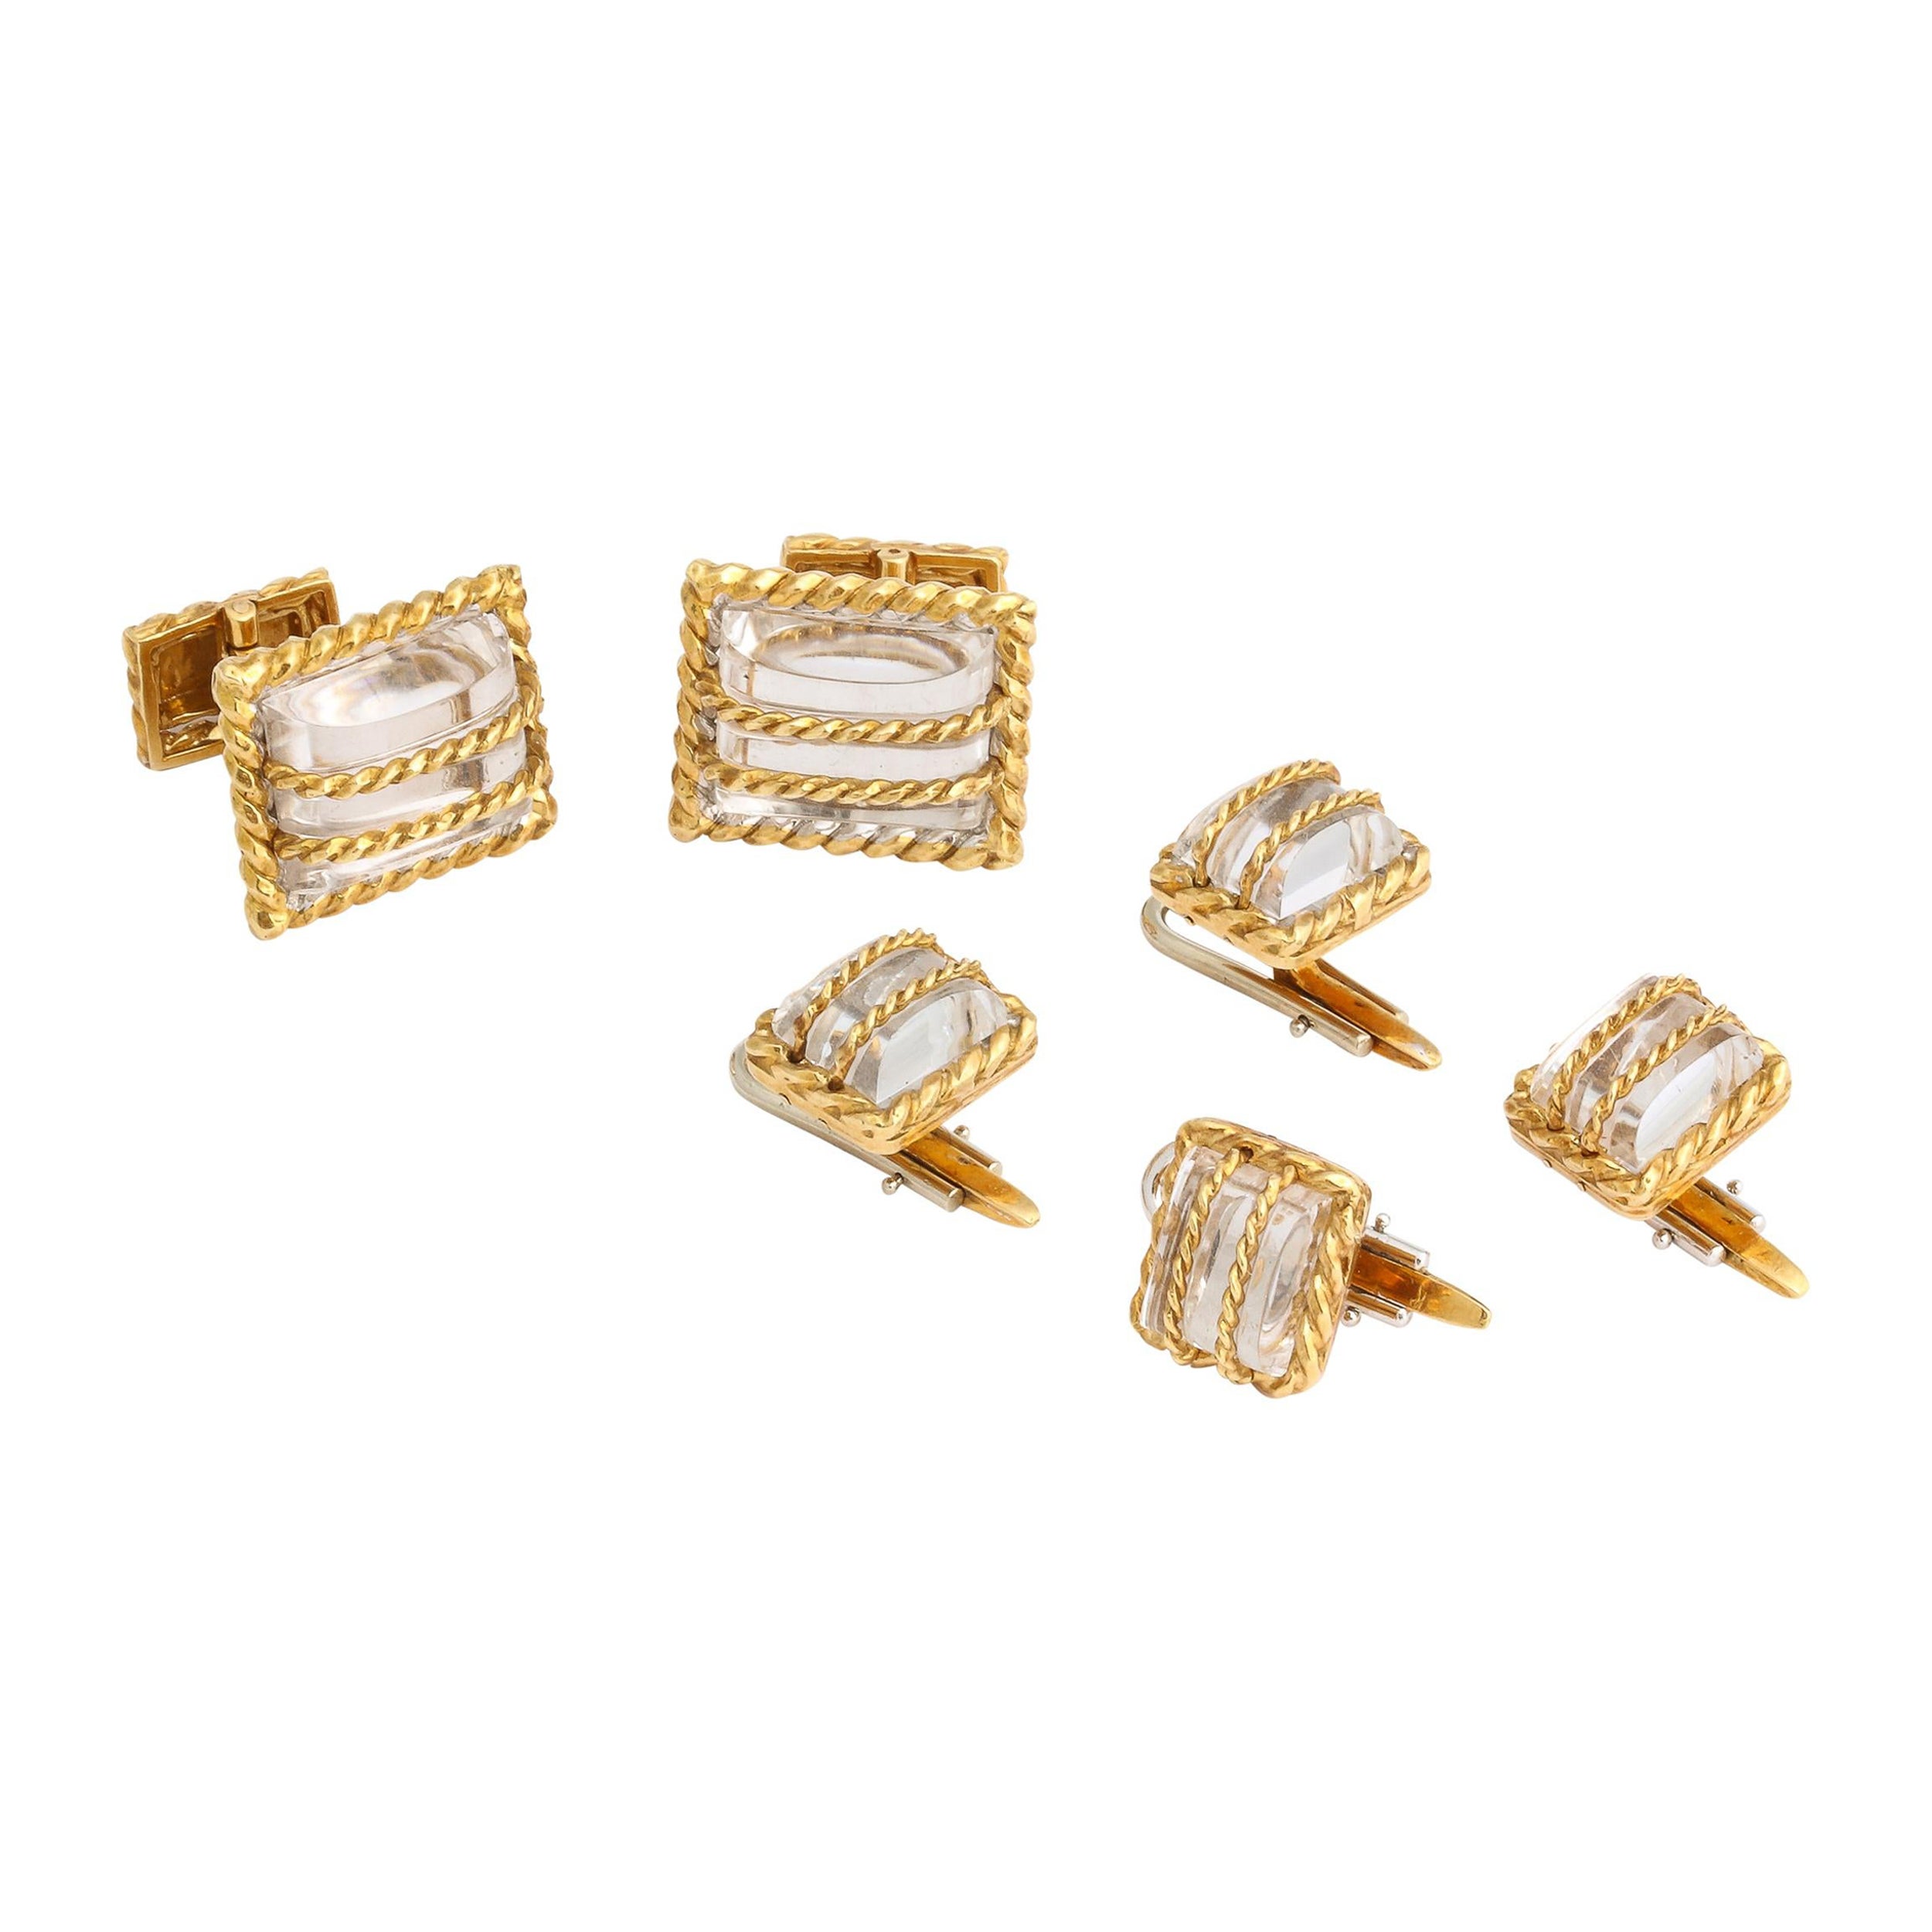 David Webb  18k Yellow Gold & Crystal  6 Piece Cufflink and Stud Set  For Sale